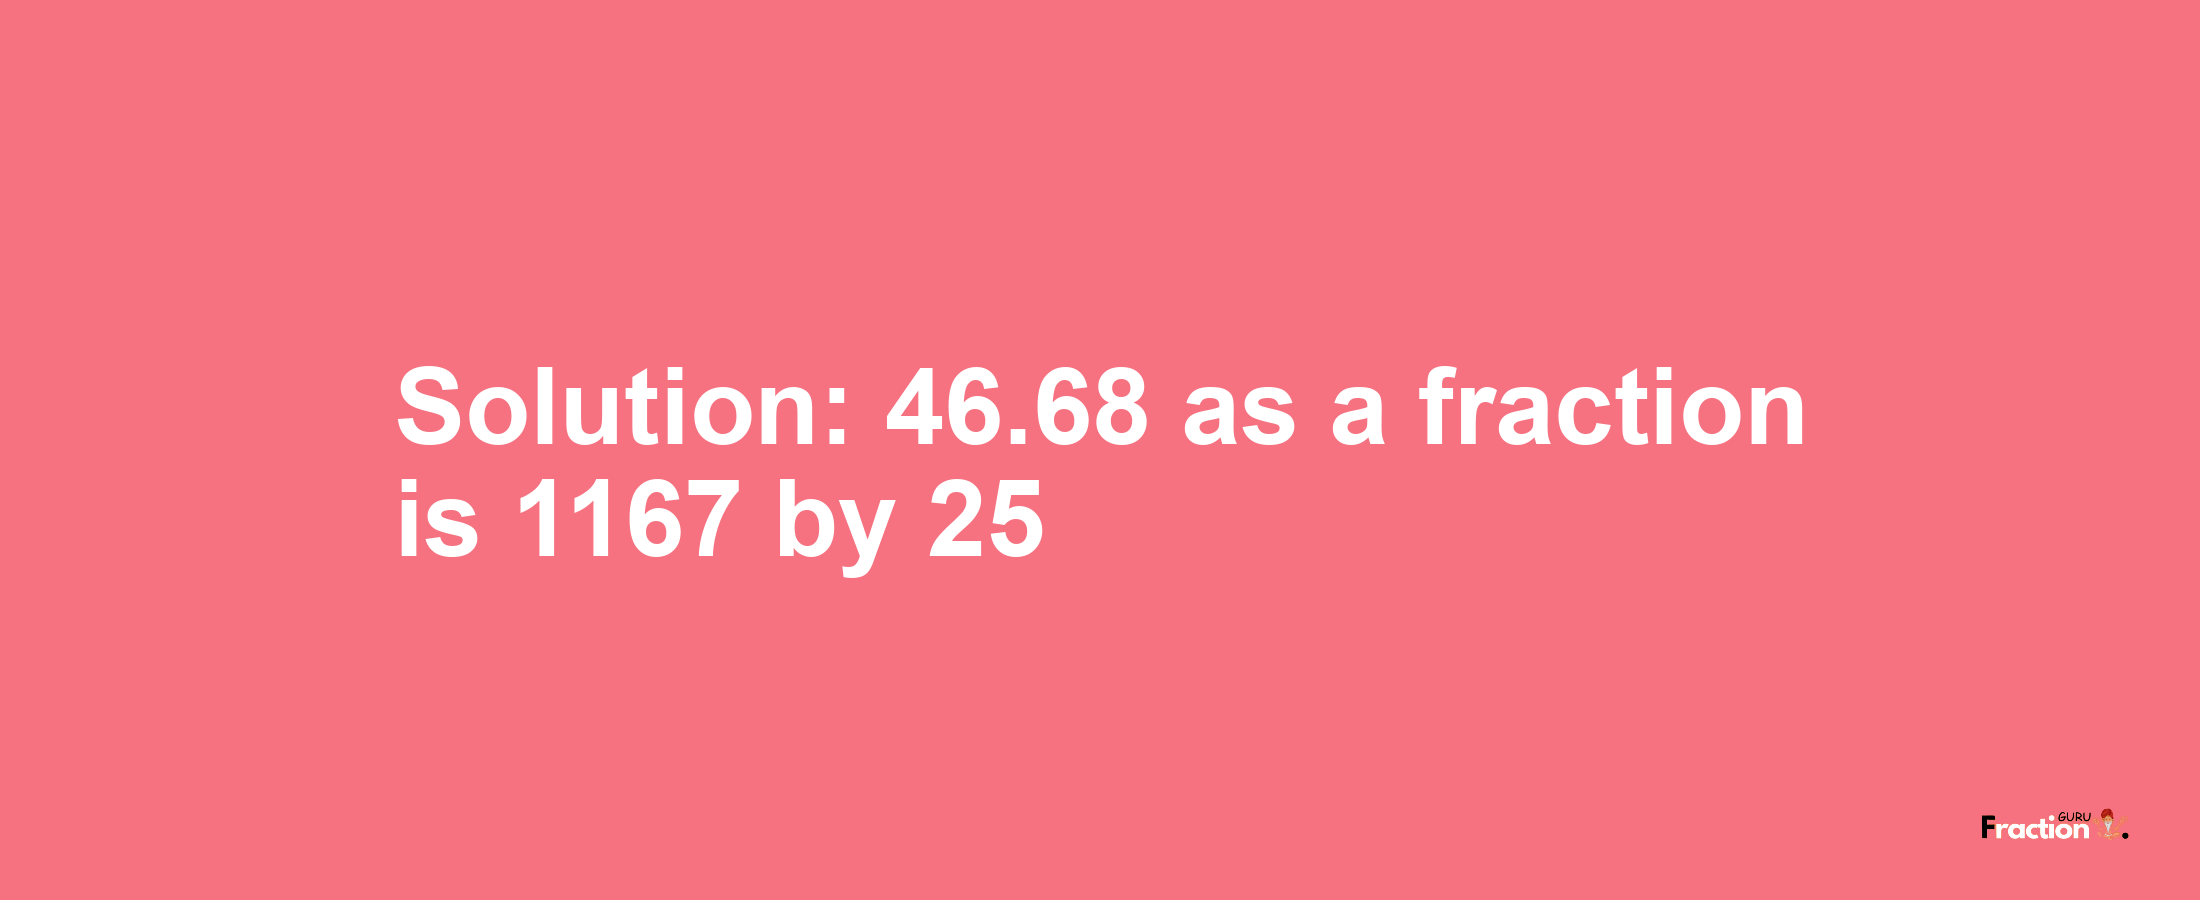 Solution:46.68 as a fraction is 1167/25